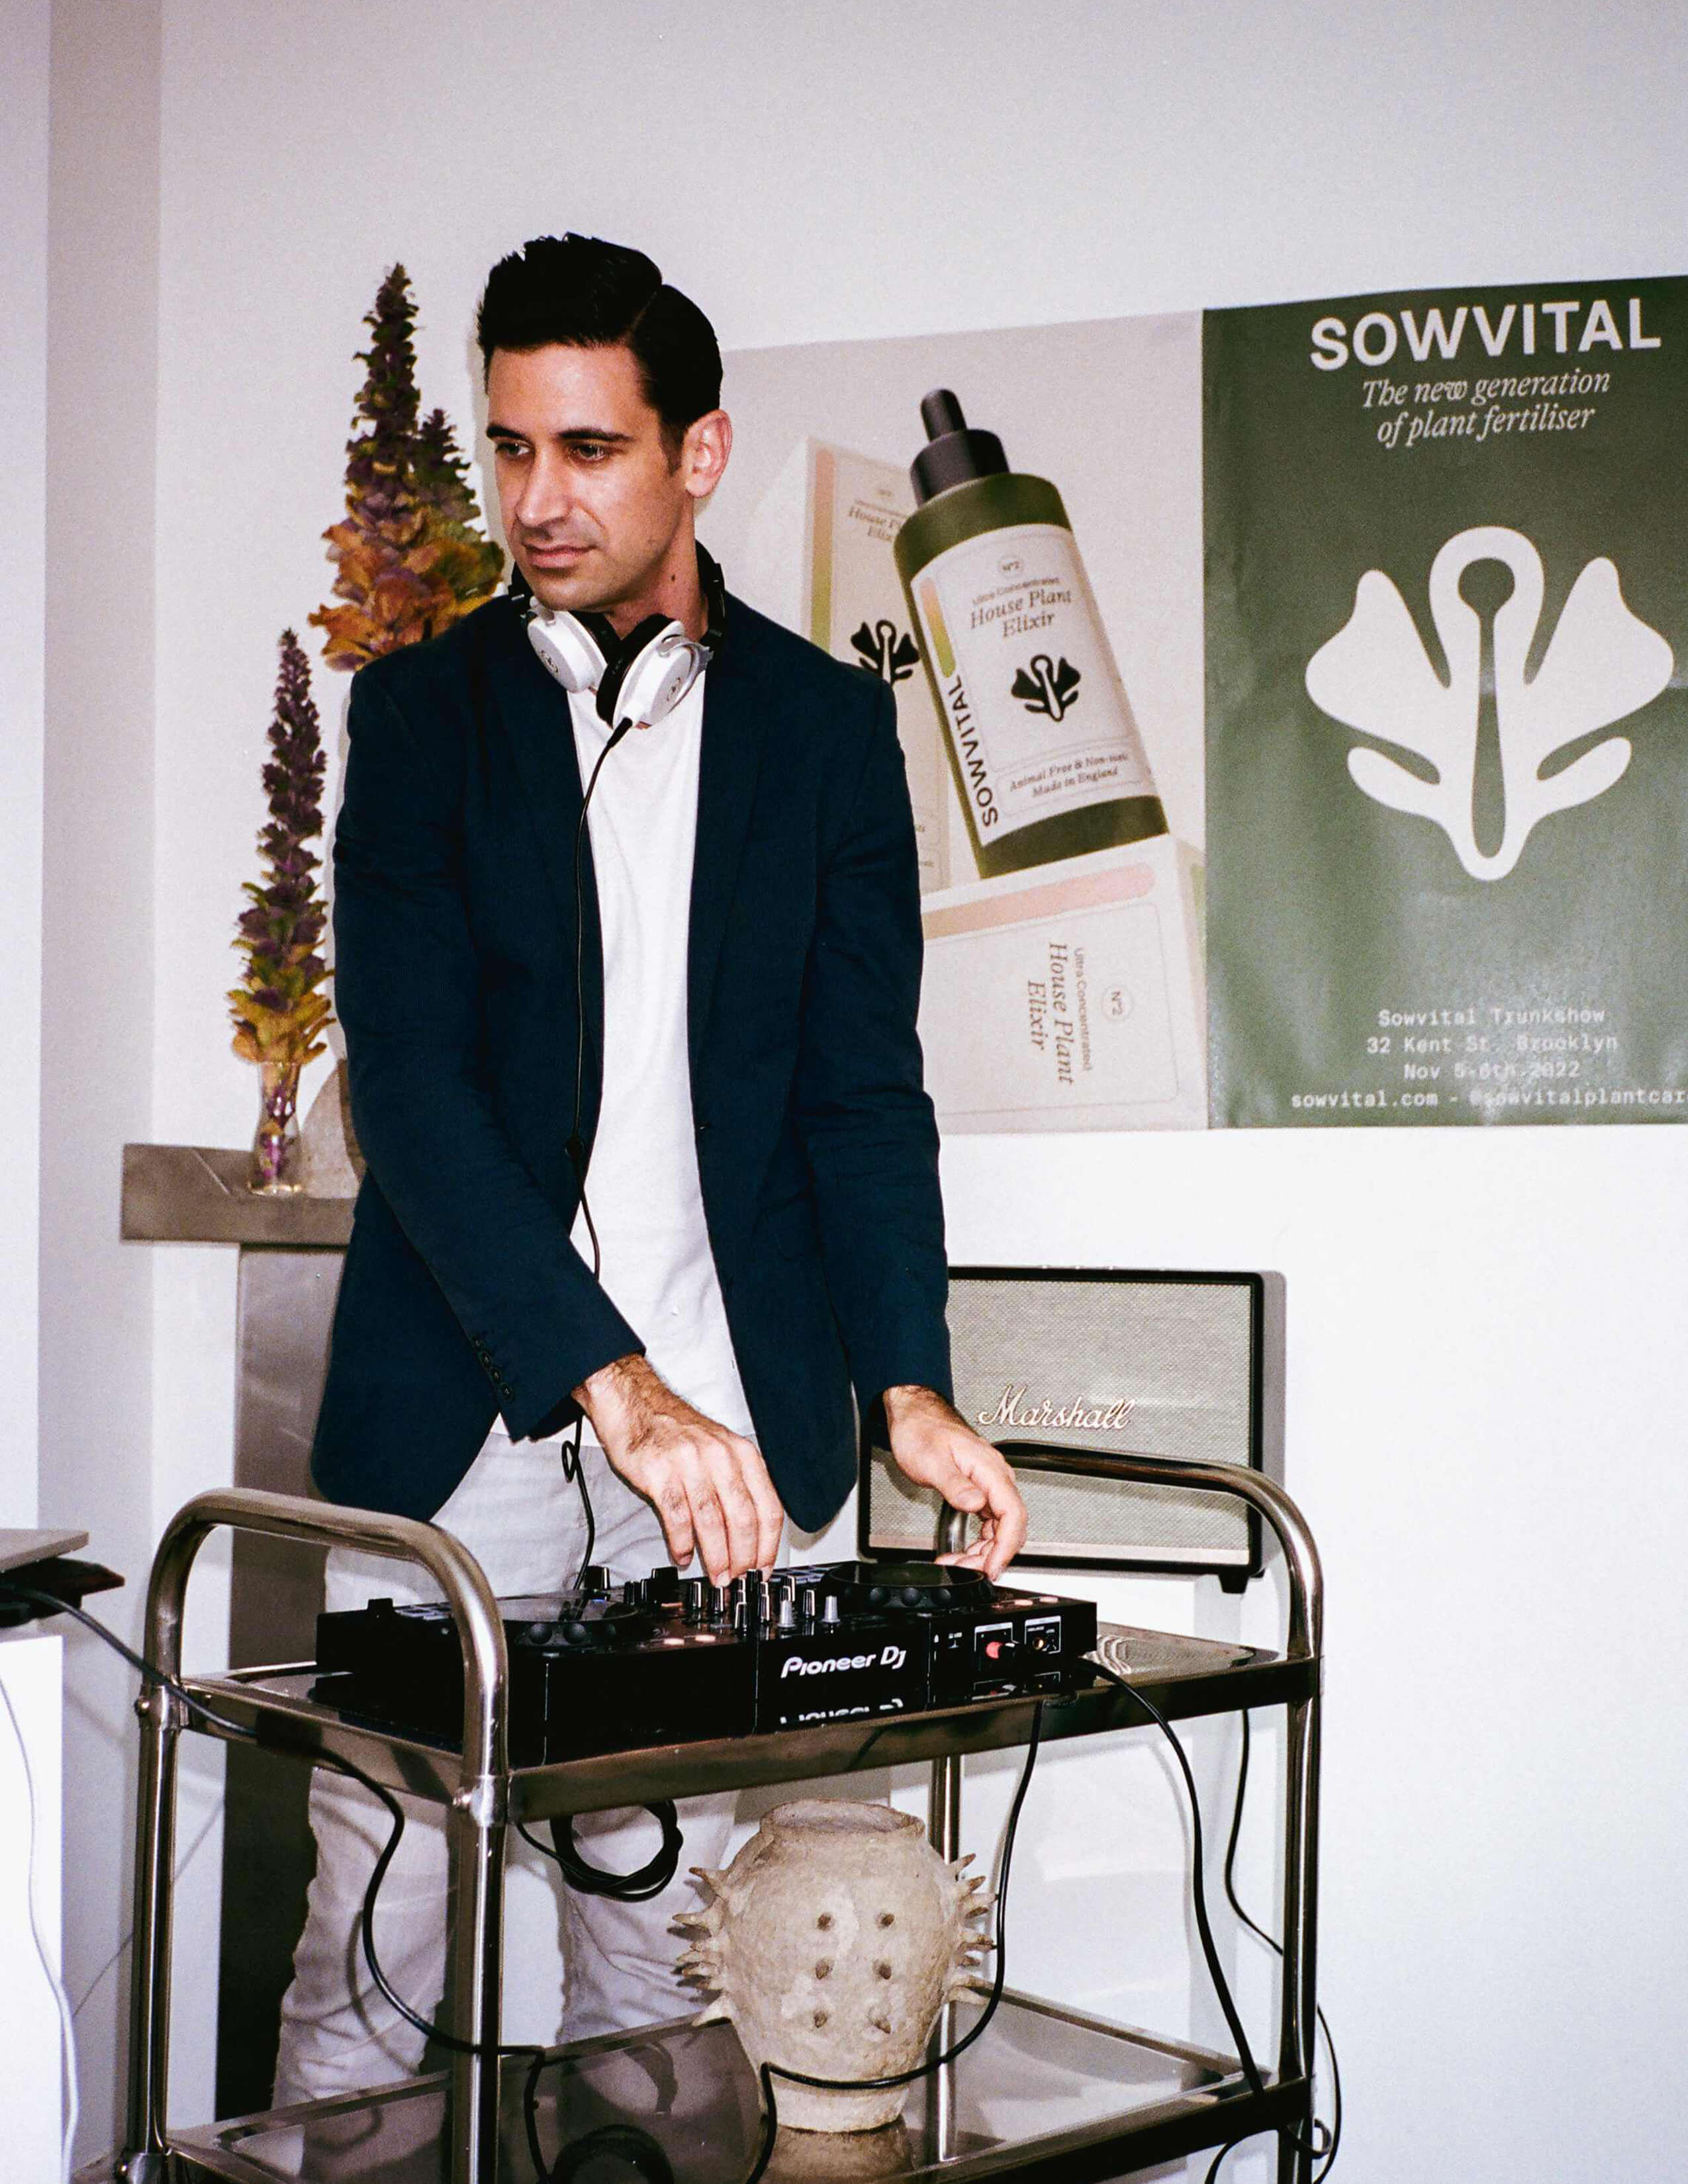 The DJ in a black blazer is djing on his Pioneer deck while there are Sowvital product posters and some plants behind him.